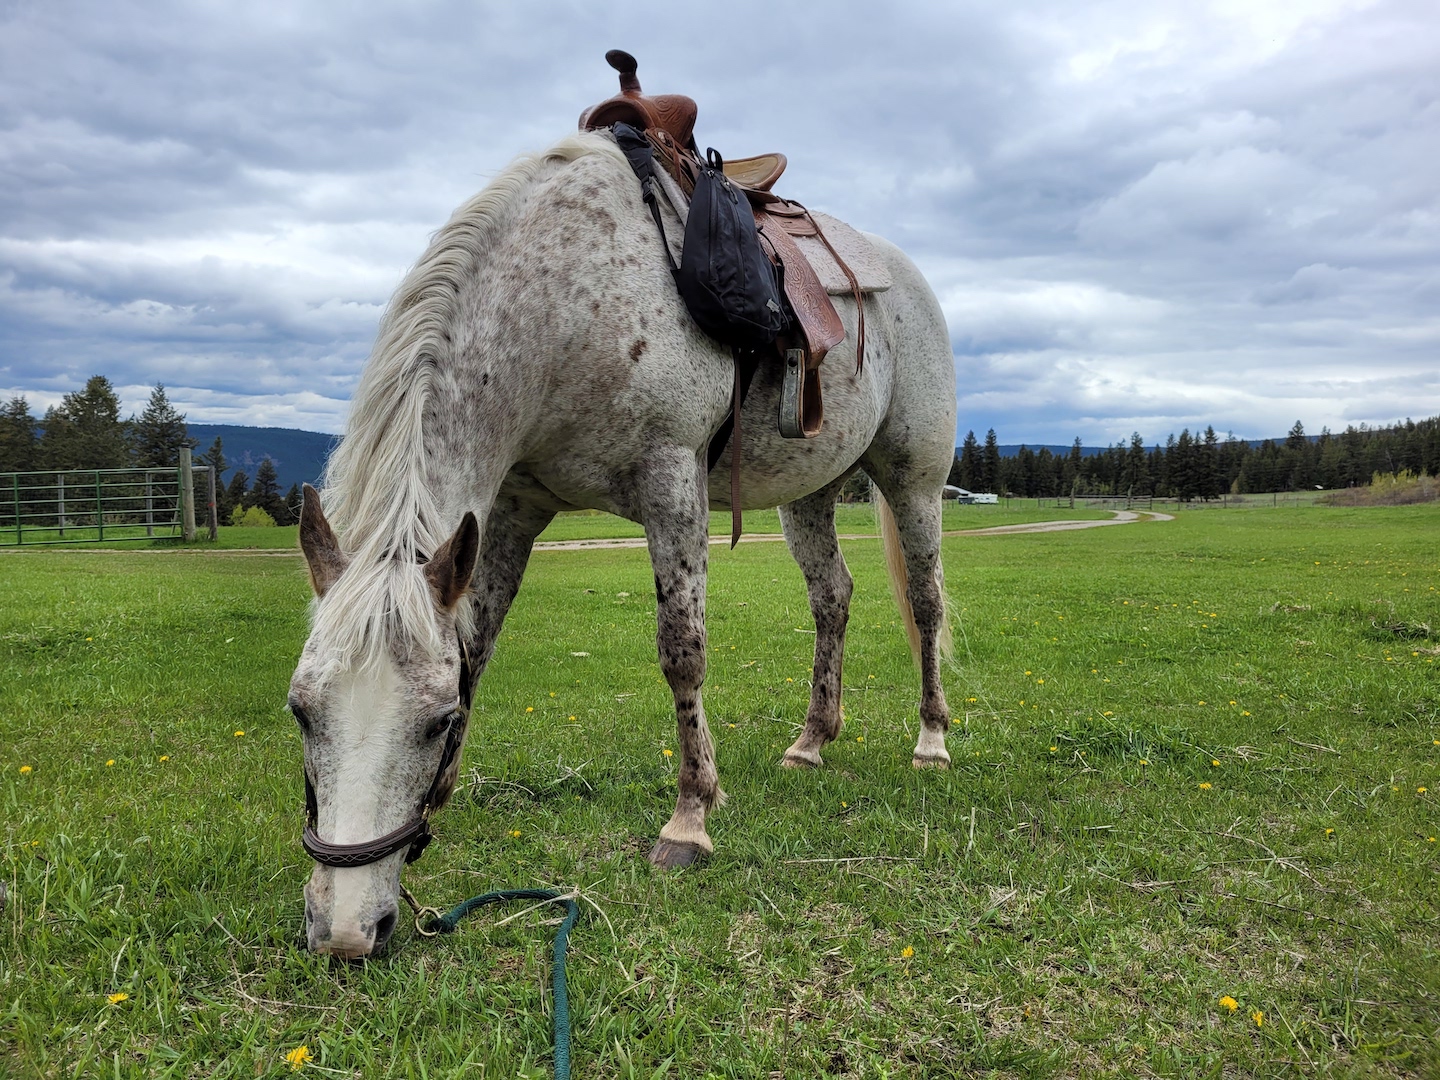 photo of an appaloosa mare in a Western saddle grazing in a field, with an overcast sky in the background